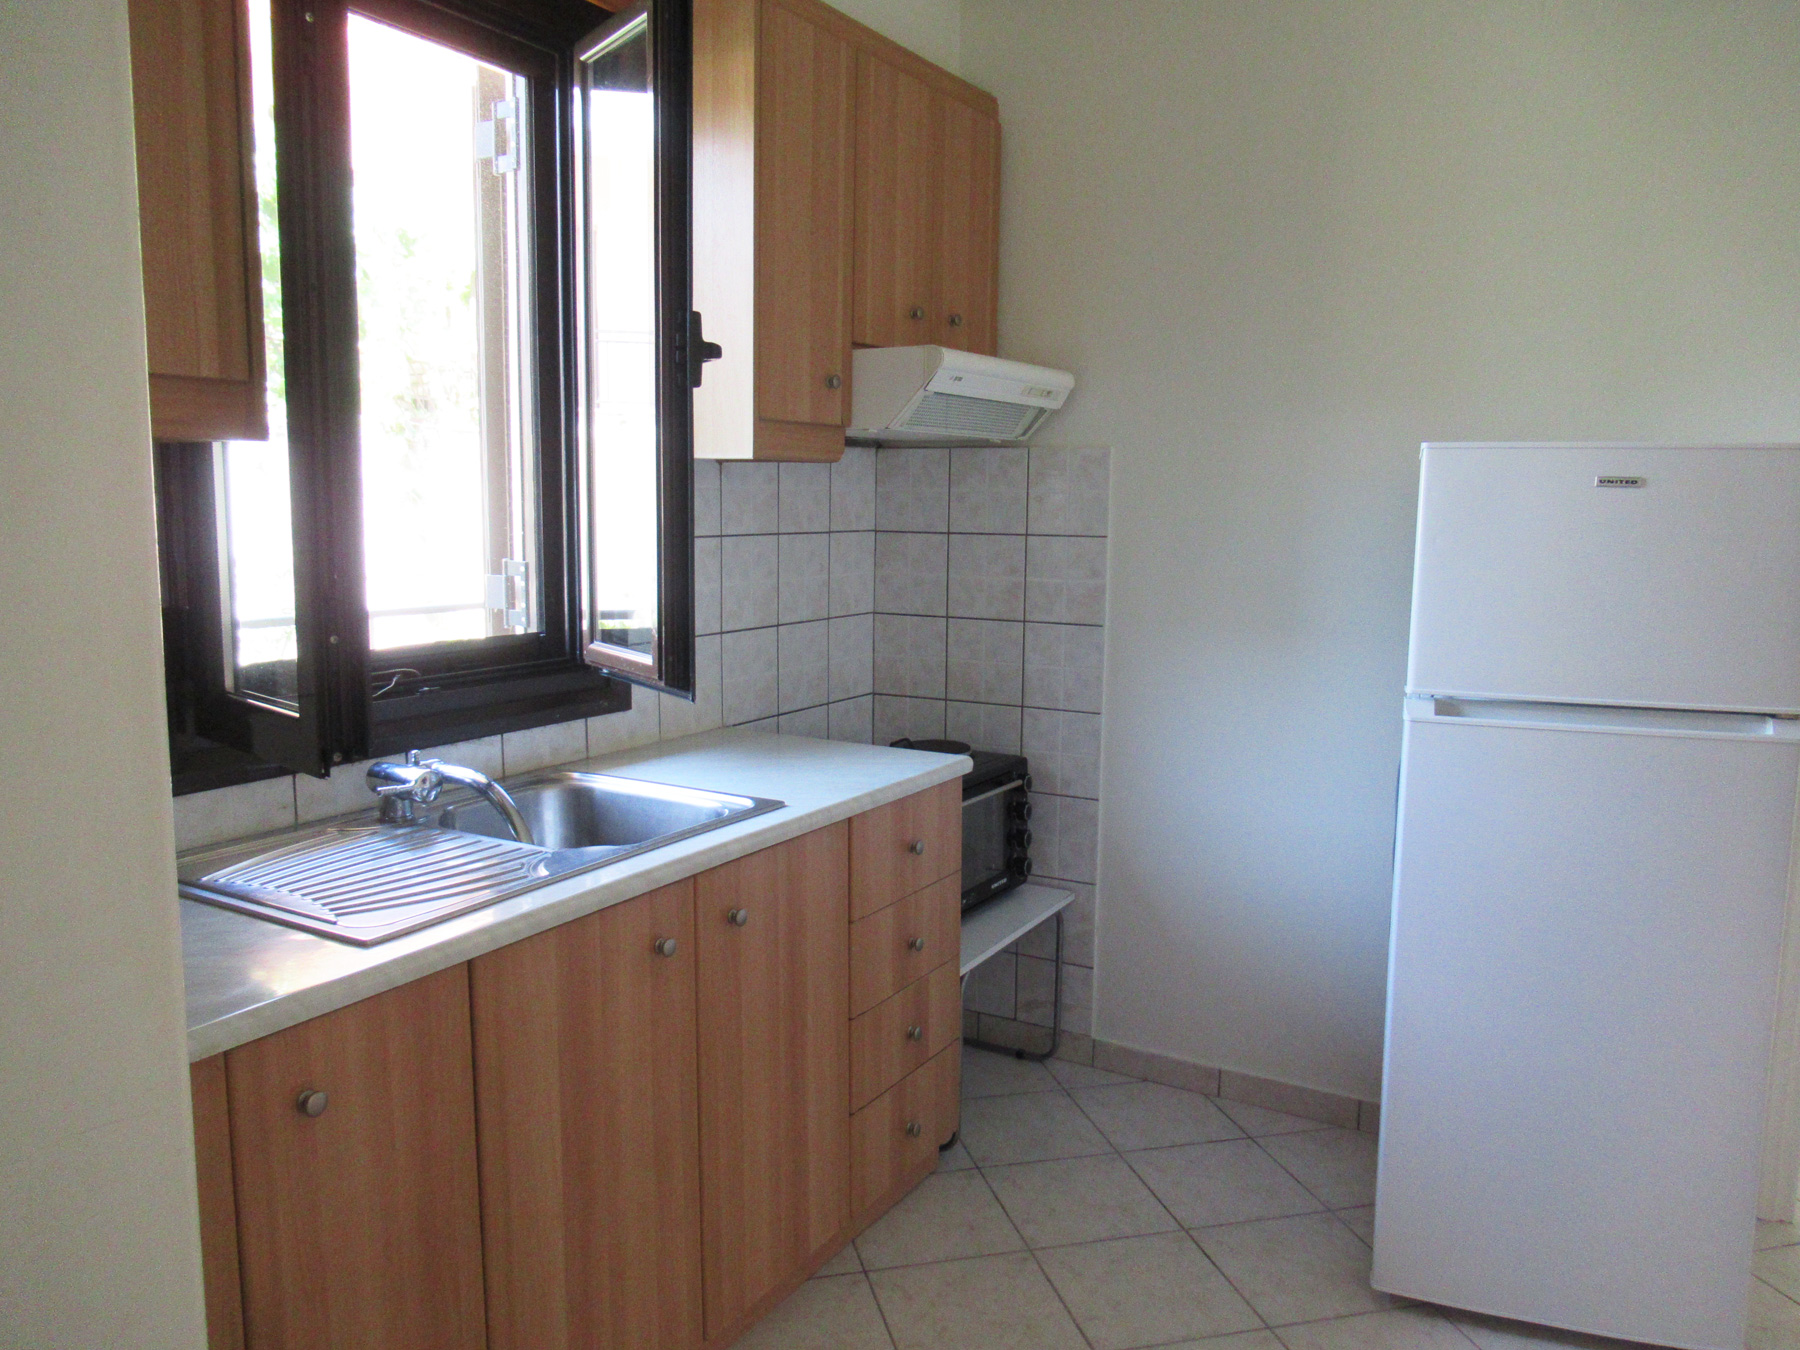 For rent fully furnished 1 bedroom studio of 40 sq.m. in Velissarios area in Ioannina